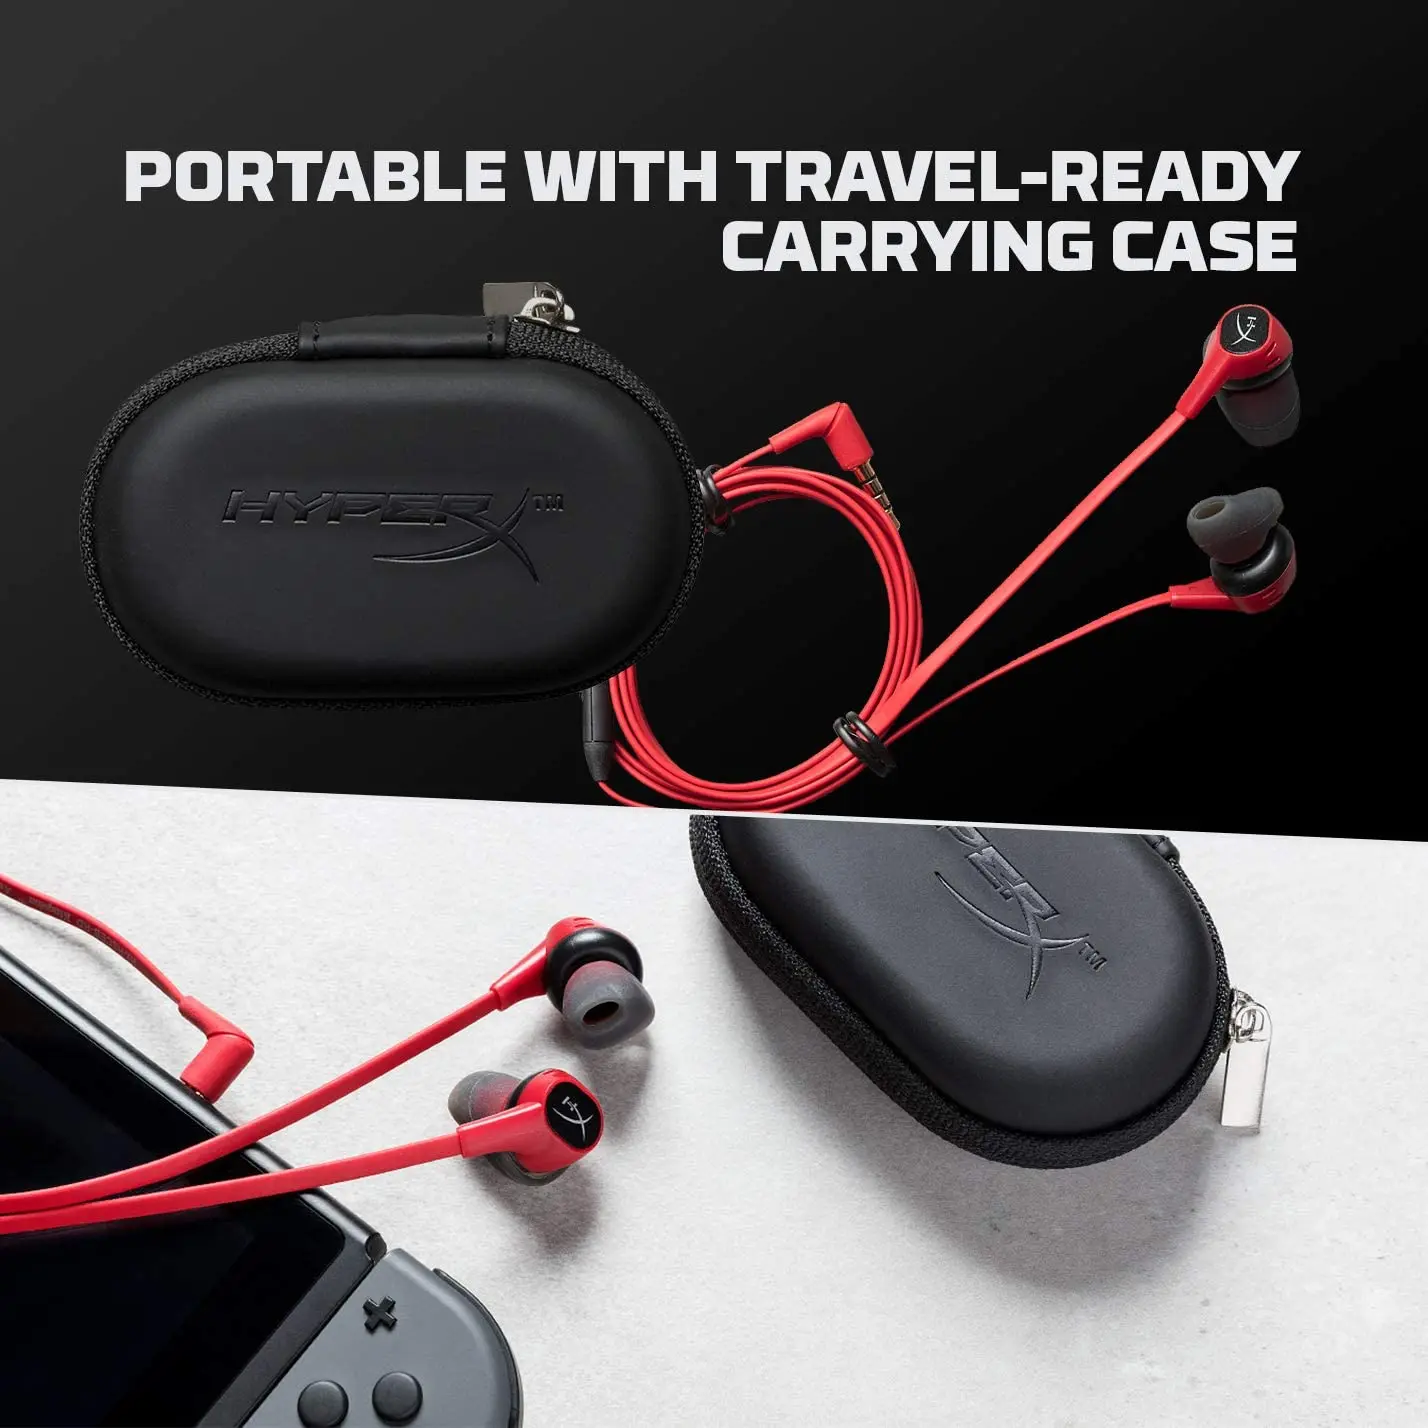 HyperX Cloud Earbuds In-ear esports headset Gaming Headphones with Mic for Nintendo Switch and Mobile Gaming